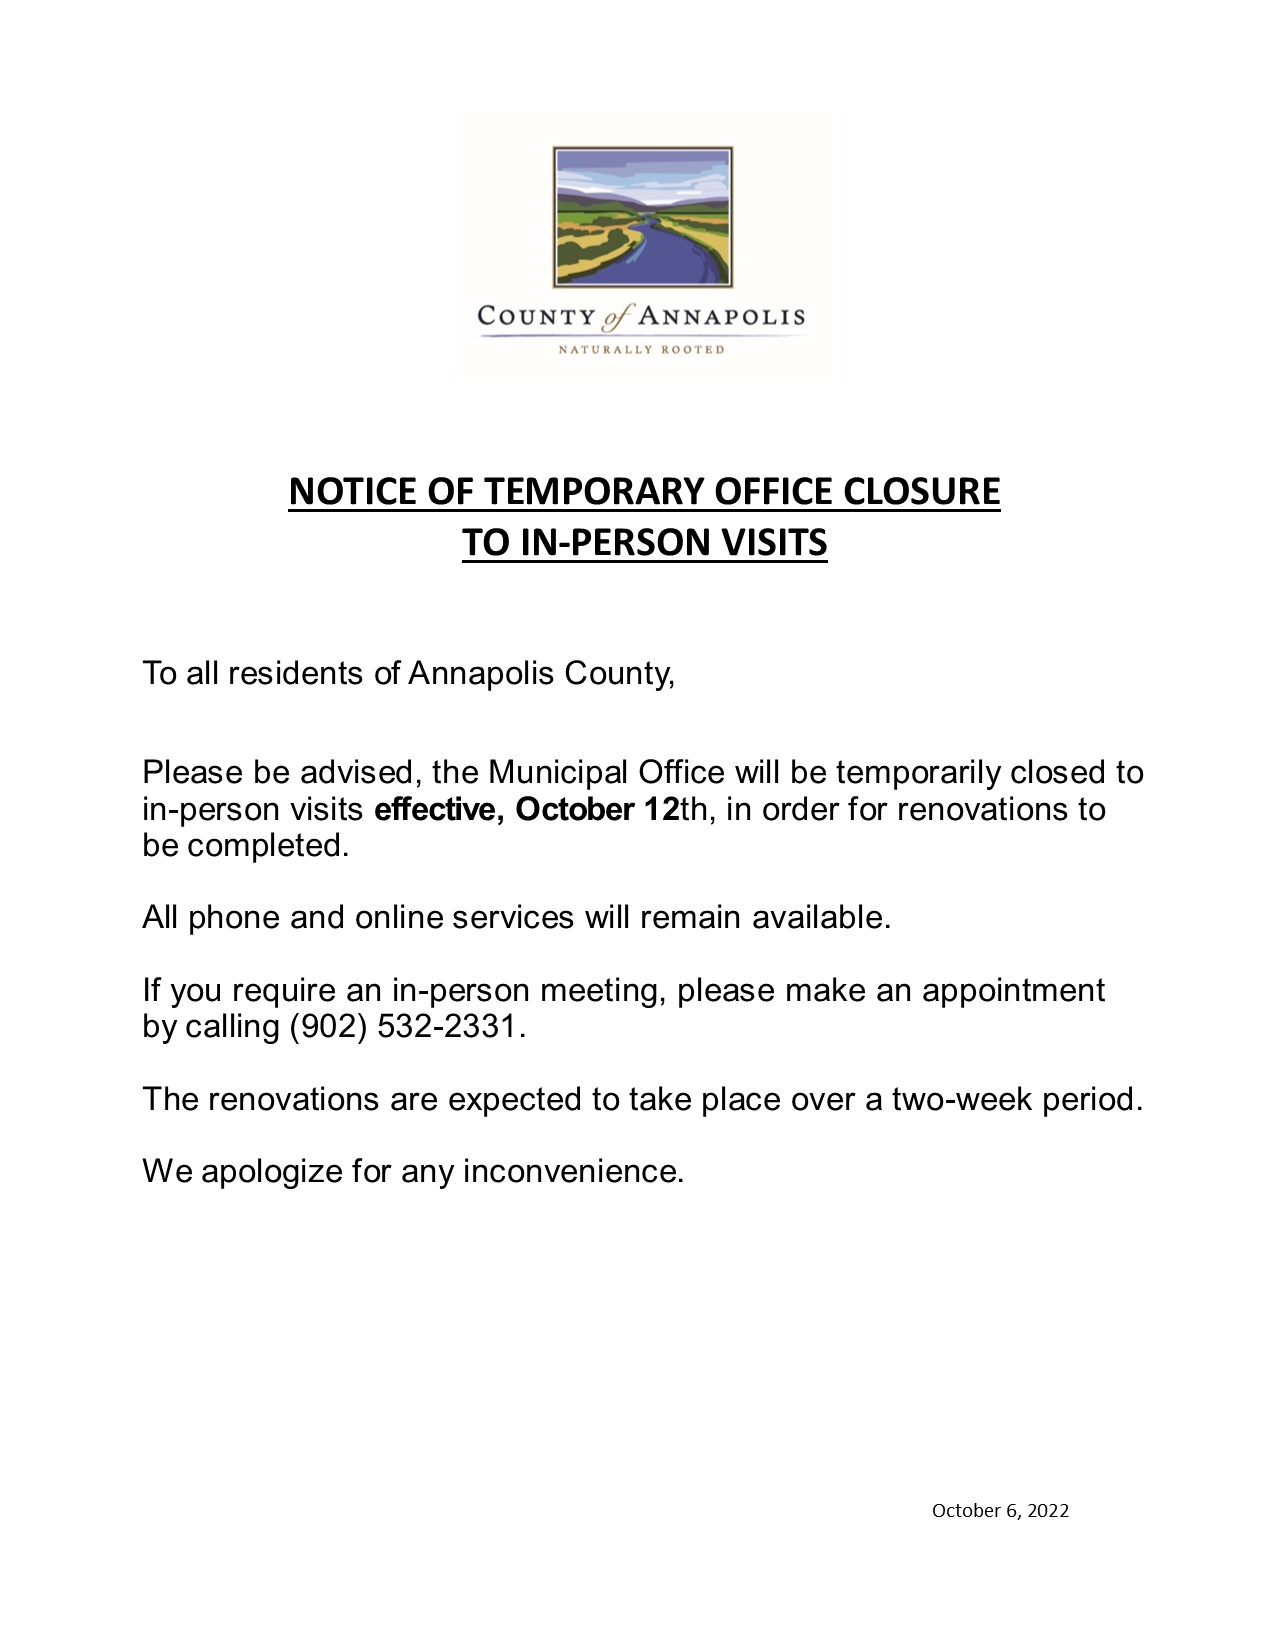 Municipal Office Temporary Closure to In Person Visits